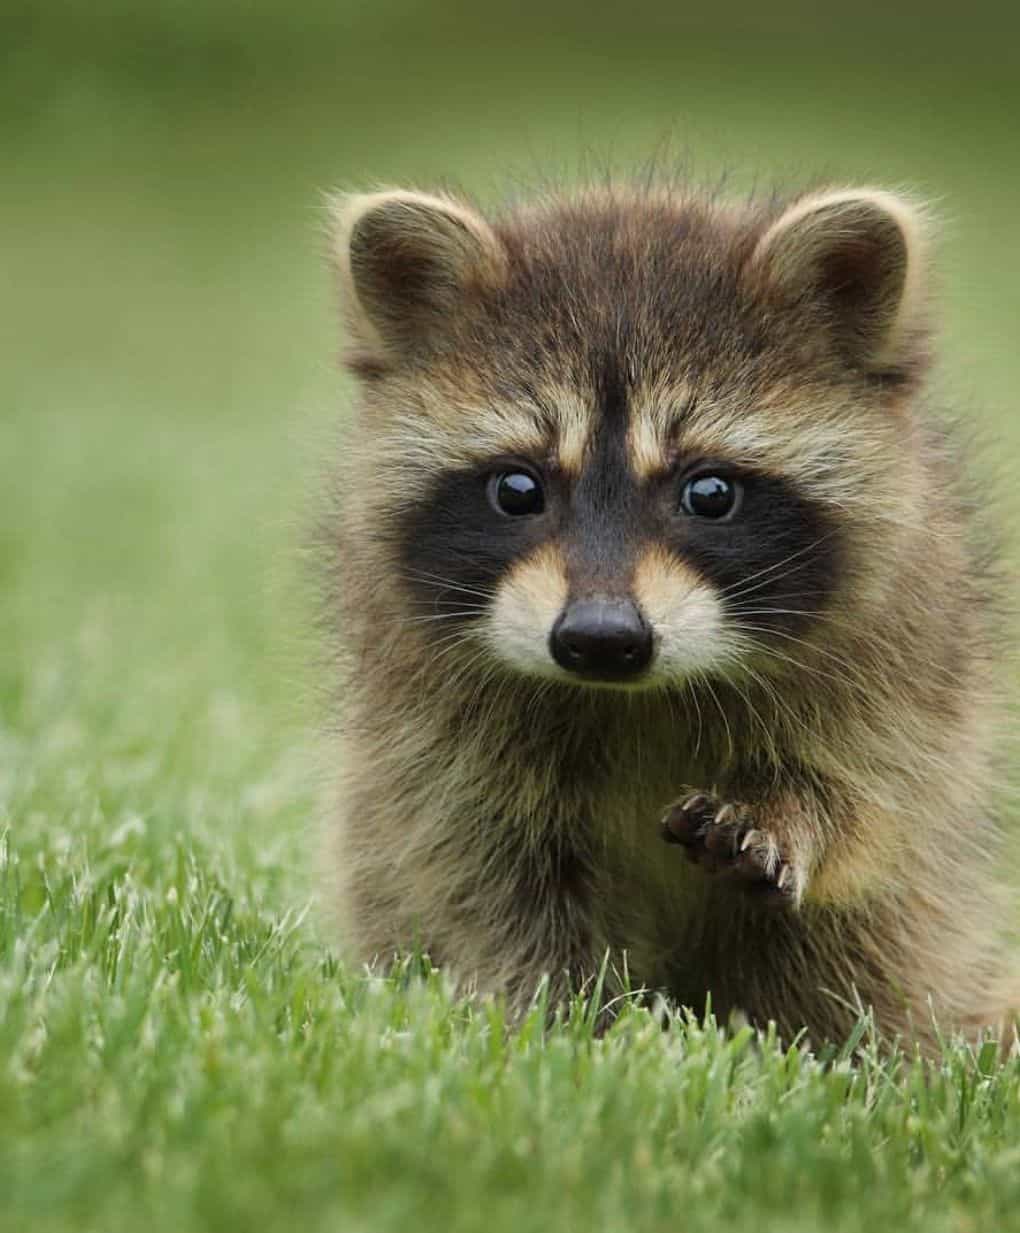 How to Prevent Raccoons From Entering Your Property